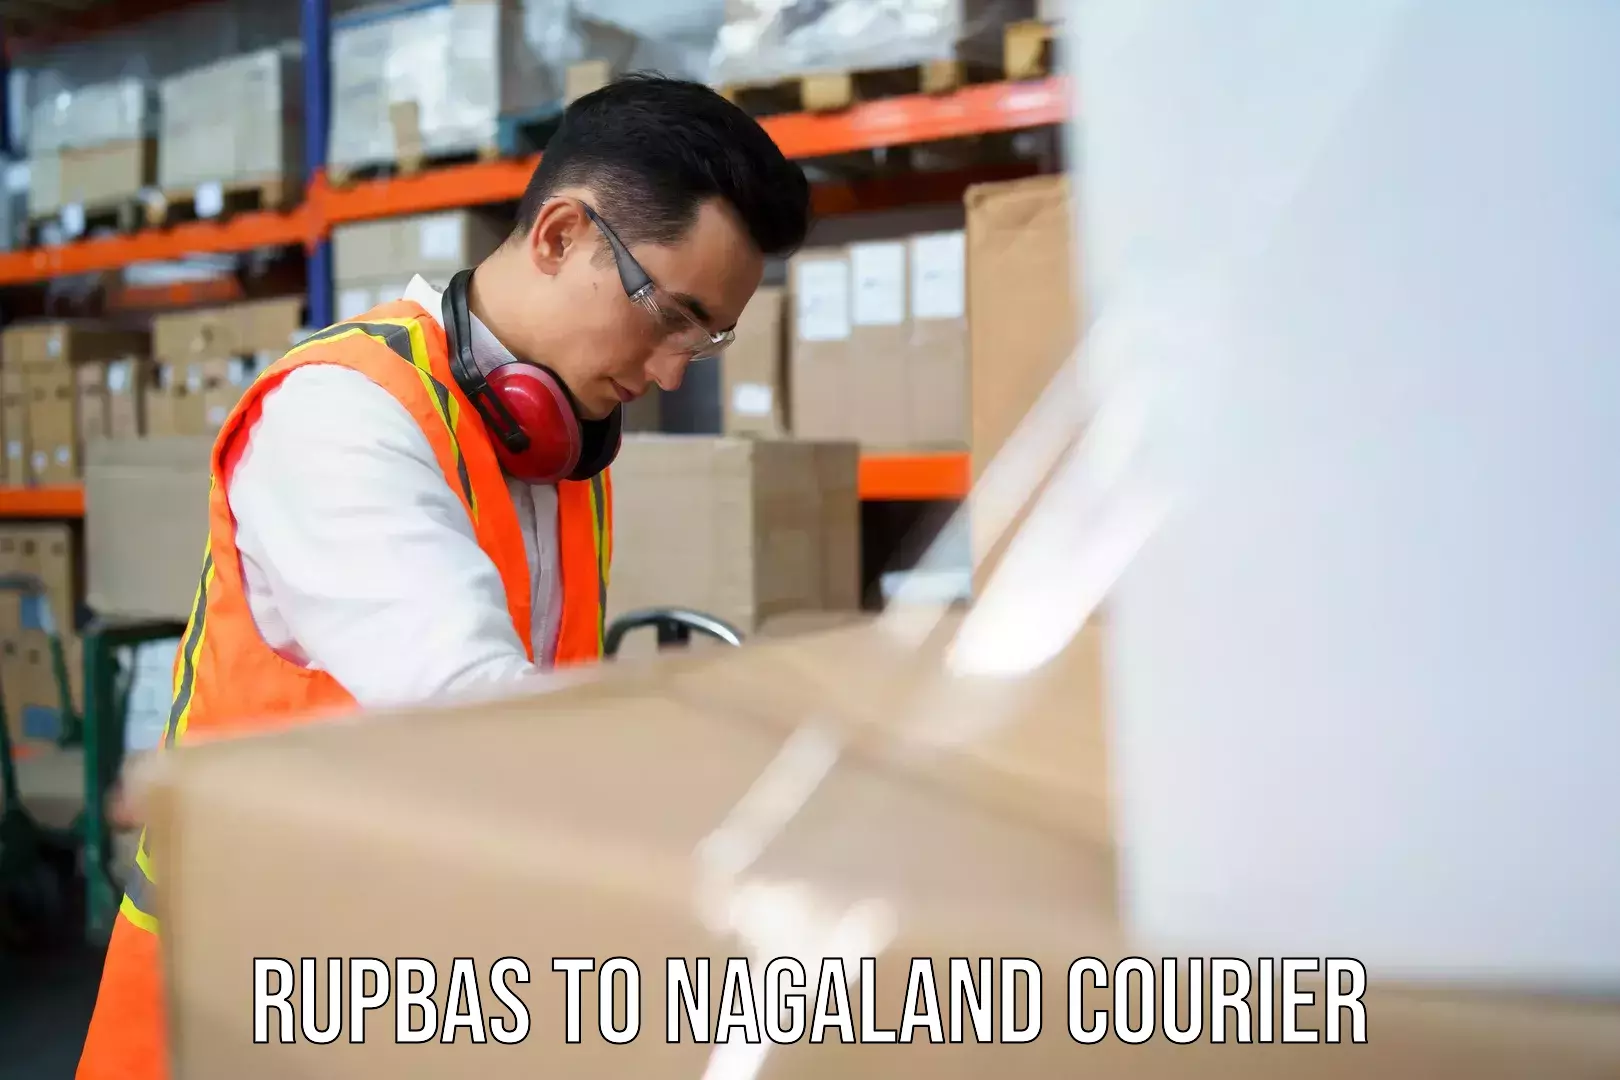 Multi-service courier options Rupbas to Nagaland